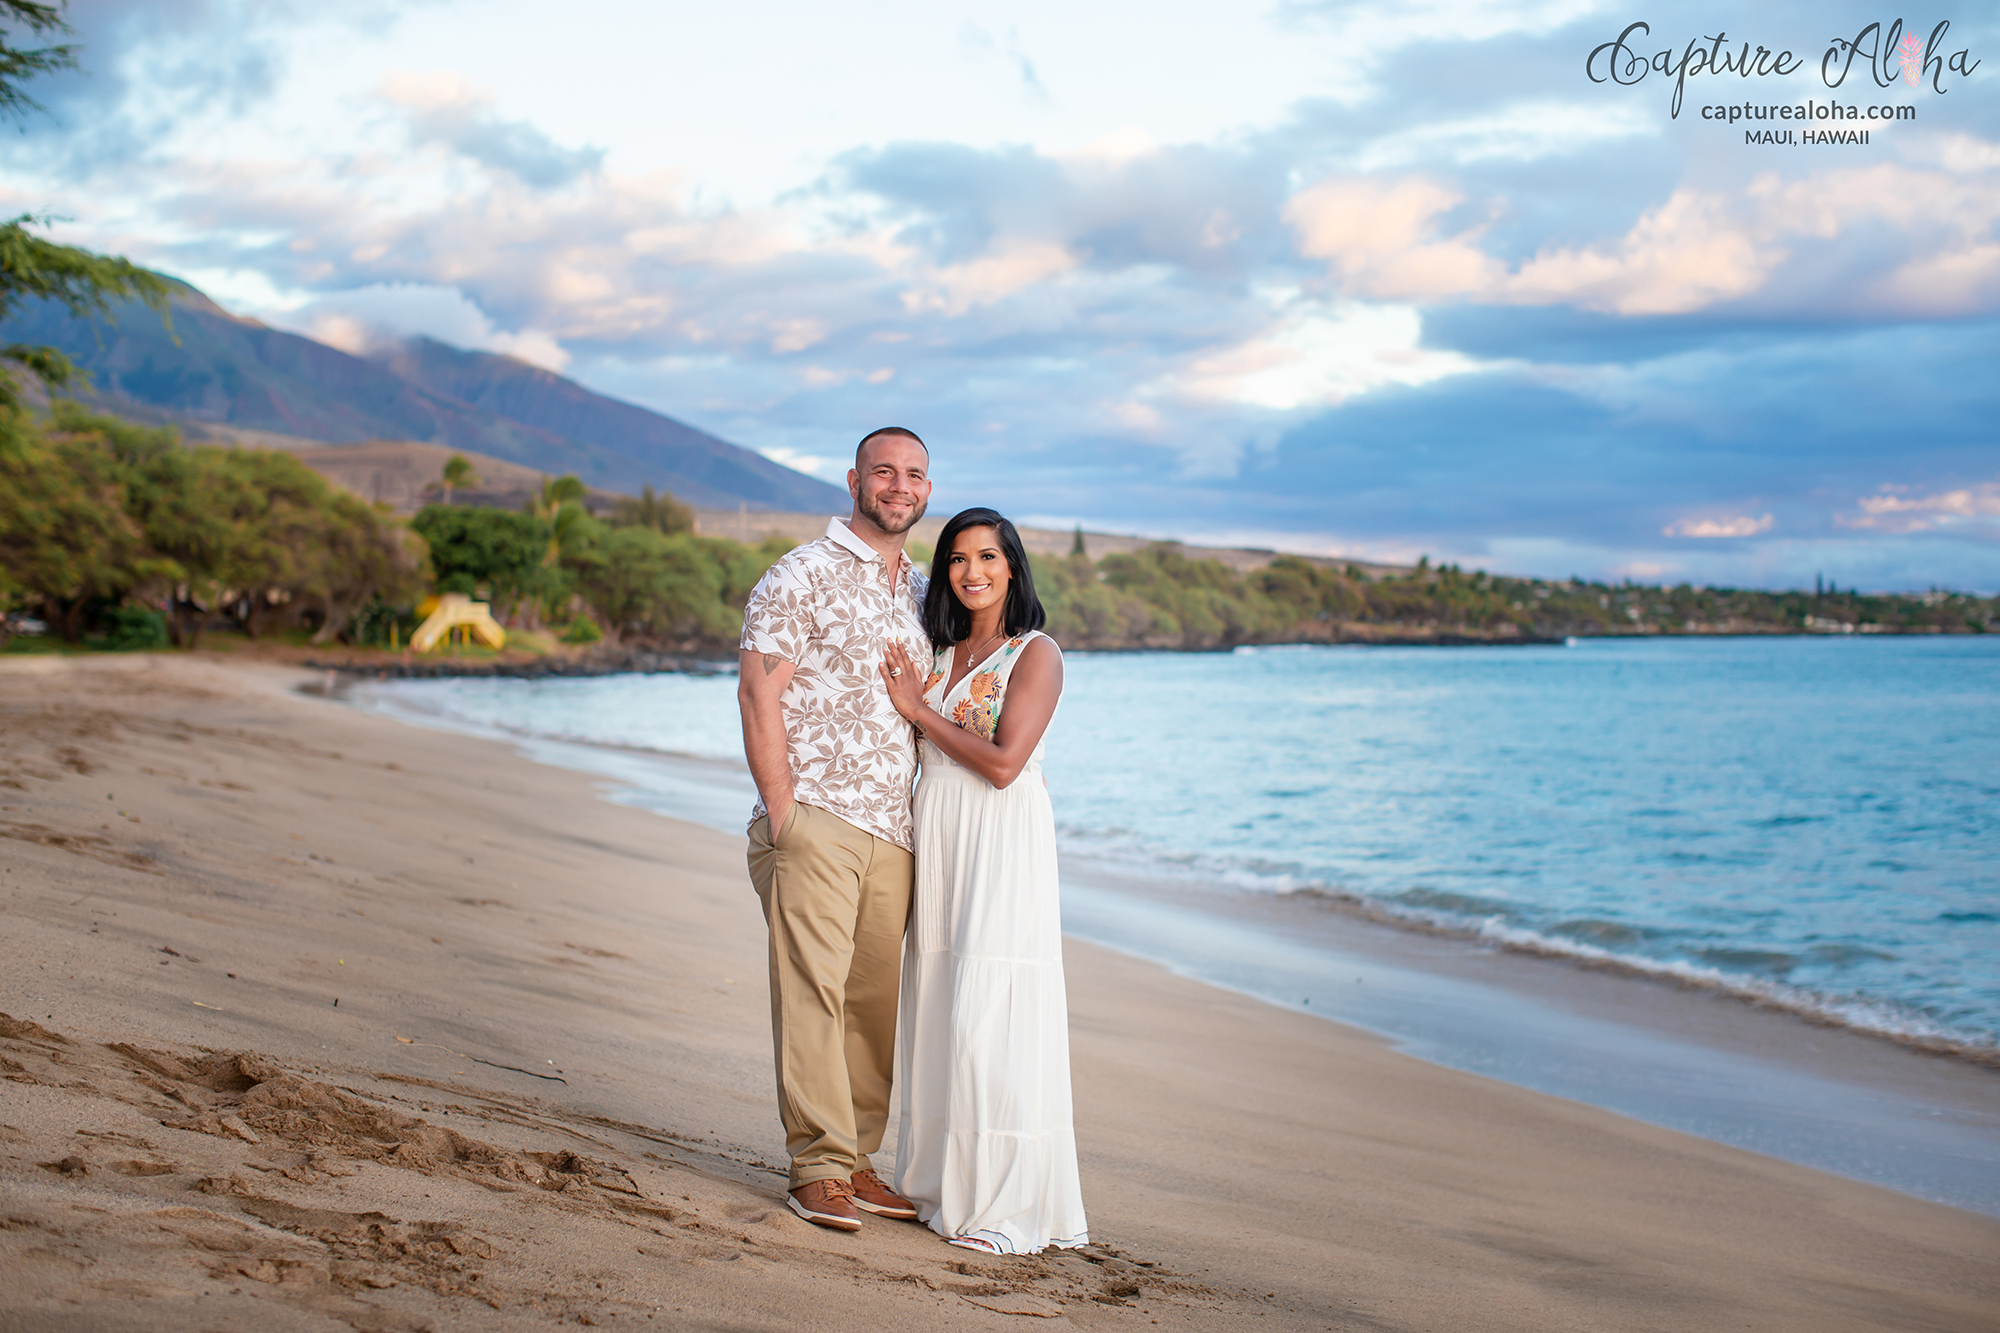 A married couple on the beach in Maui